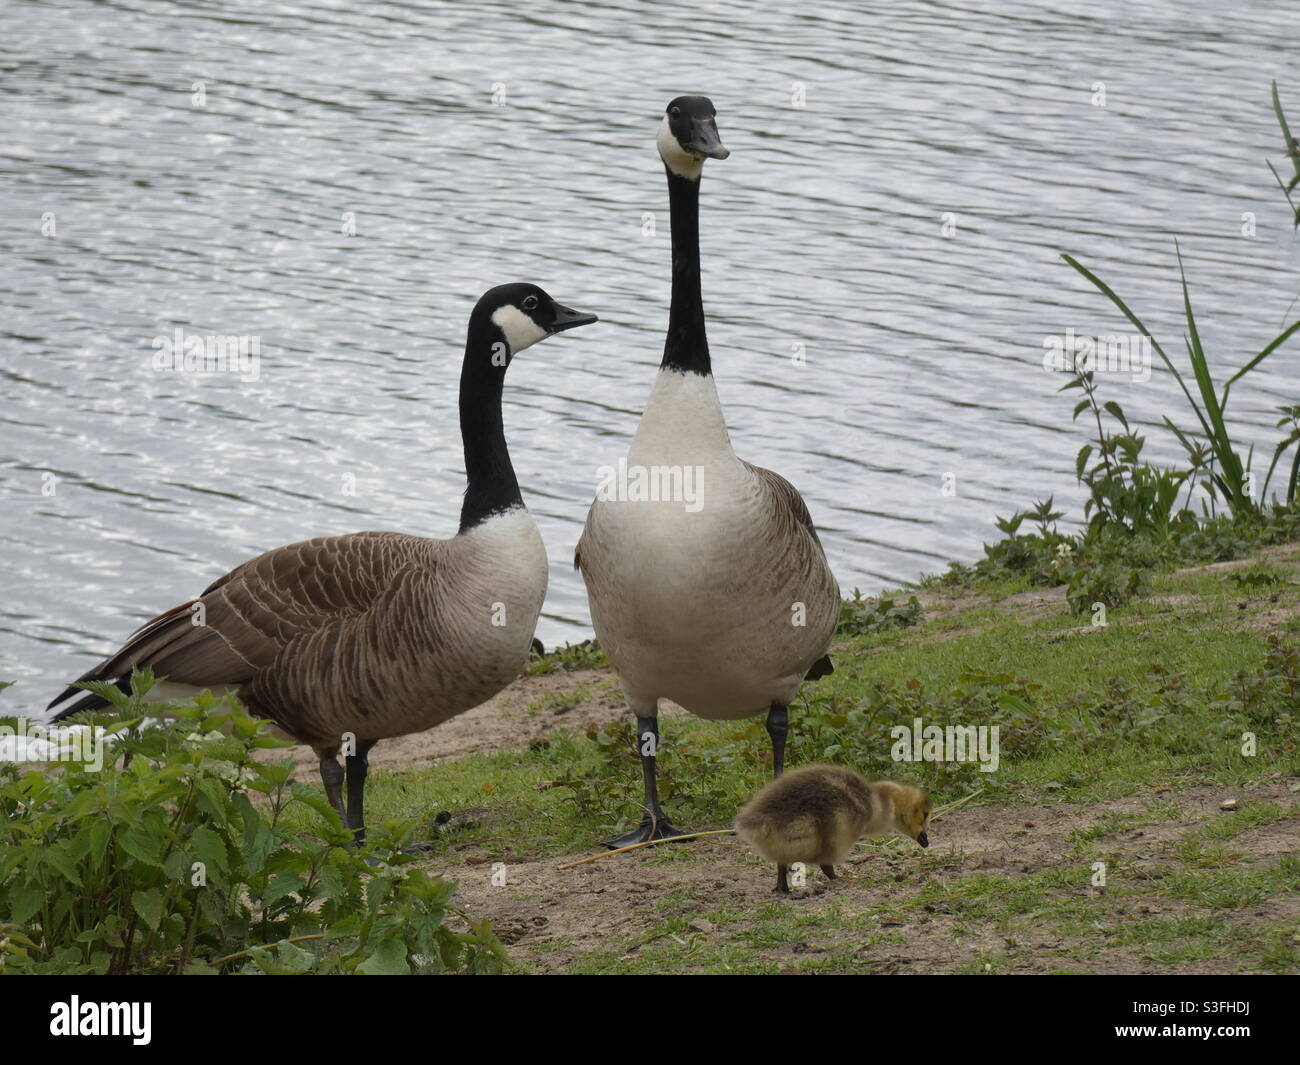 There were six Baby Geese near the lake, they were hiding in the Grass Stock Photo